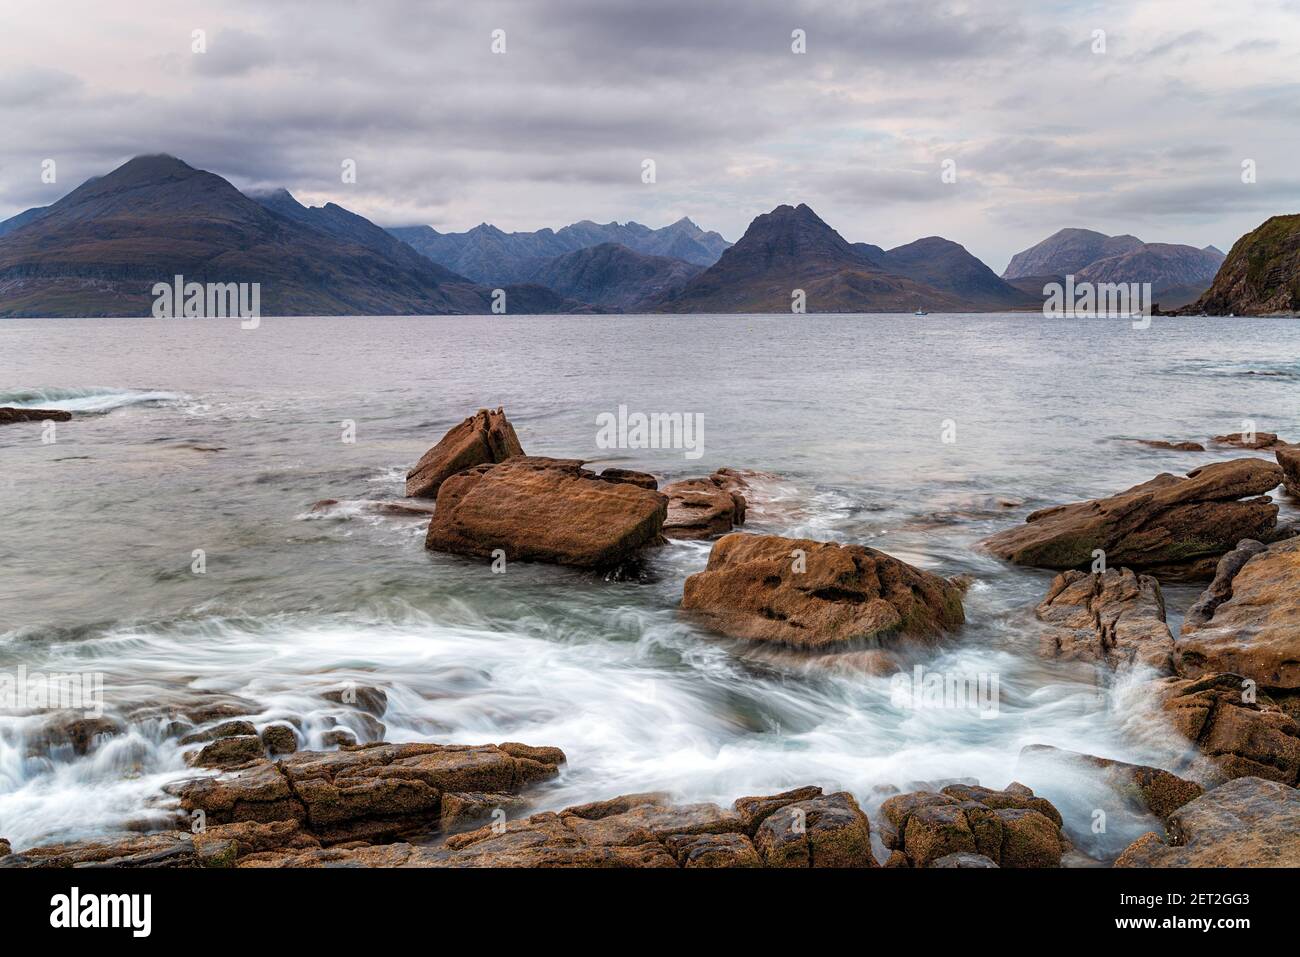 Looking out over the mountains from the rocky beach at Elgol on the Isle of Skye in Scotland Stock Photo